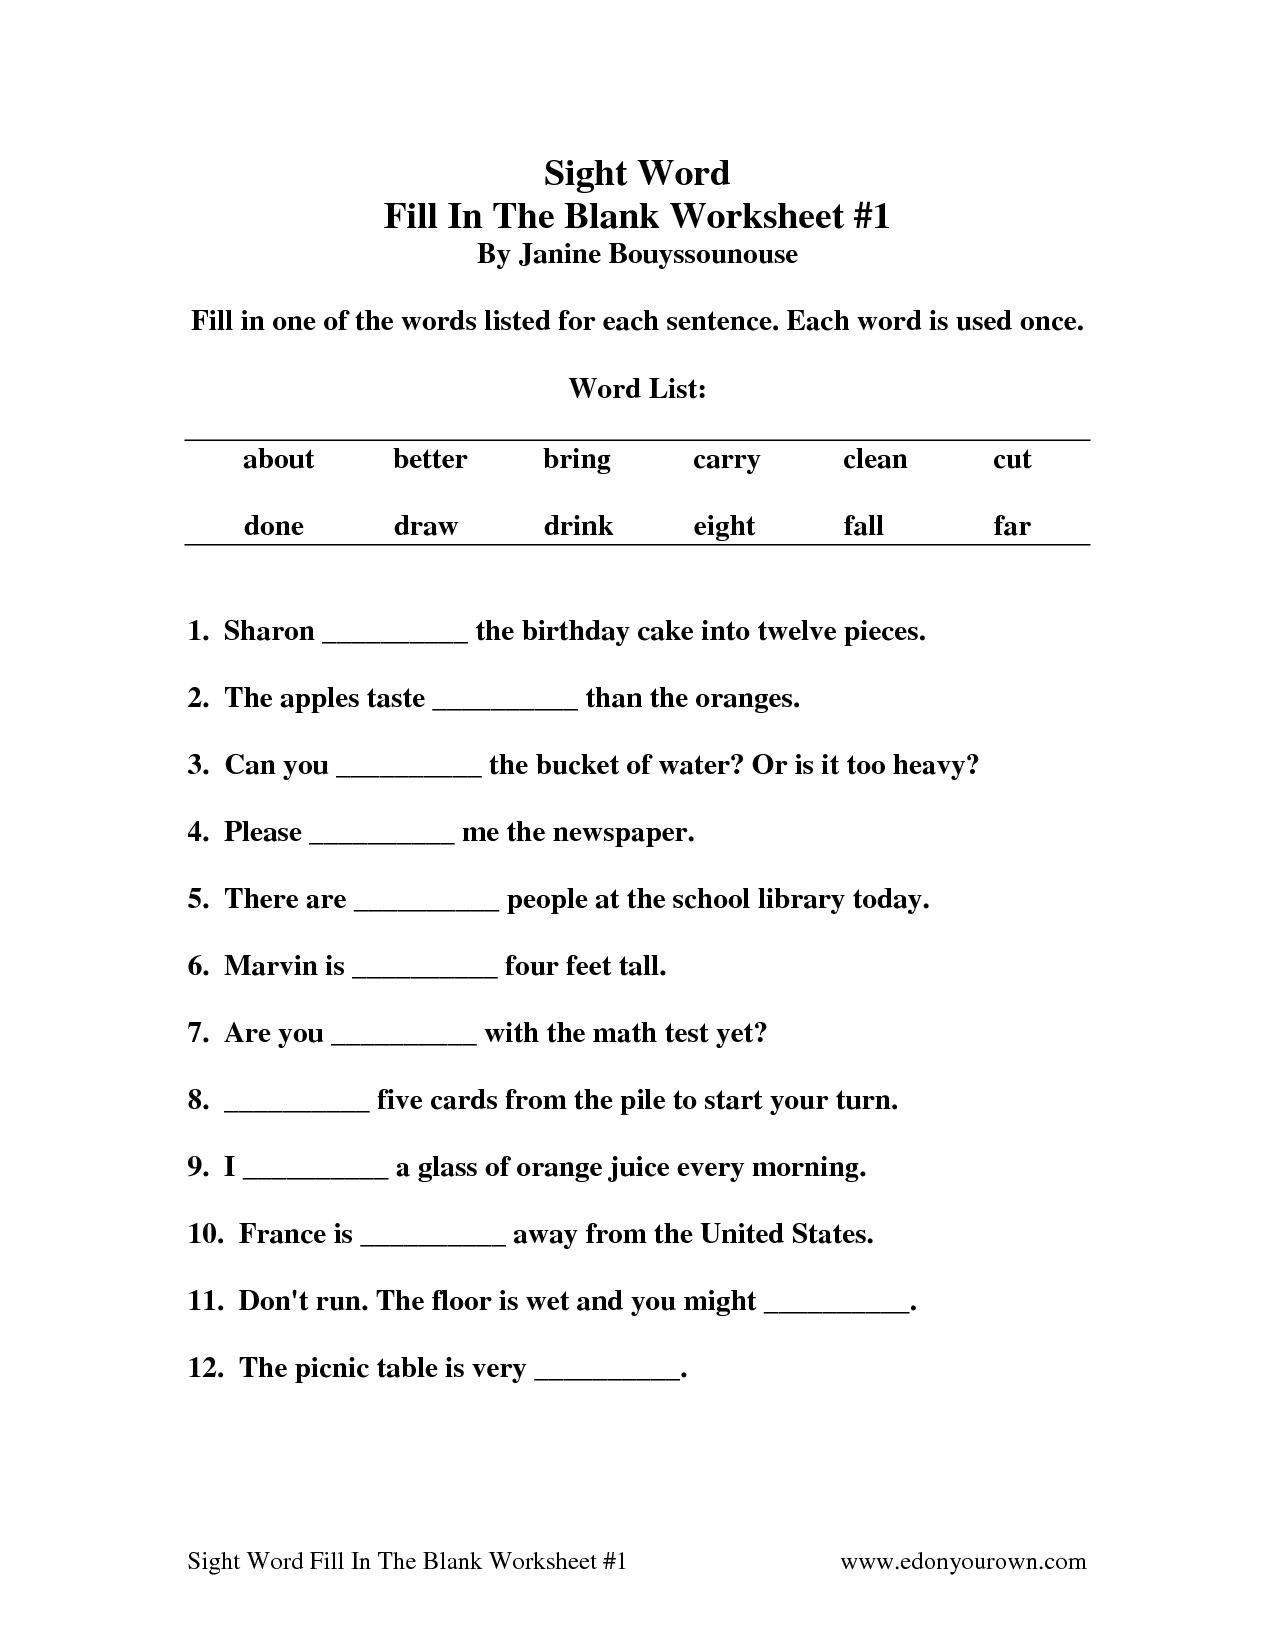 Free Printable Fill in the Blank Worksheets Image